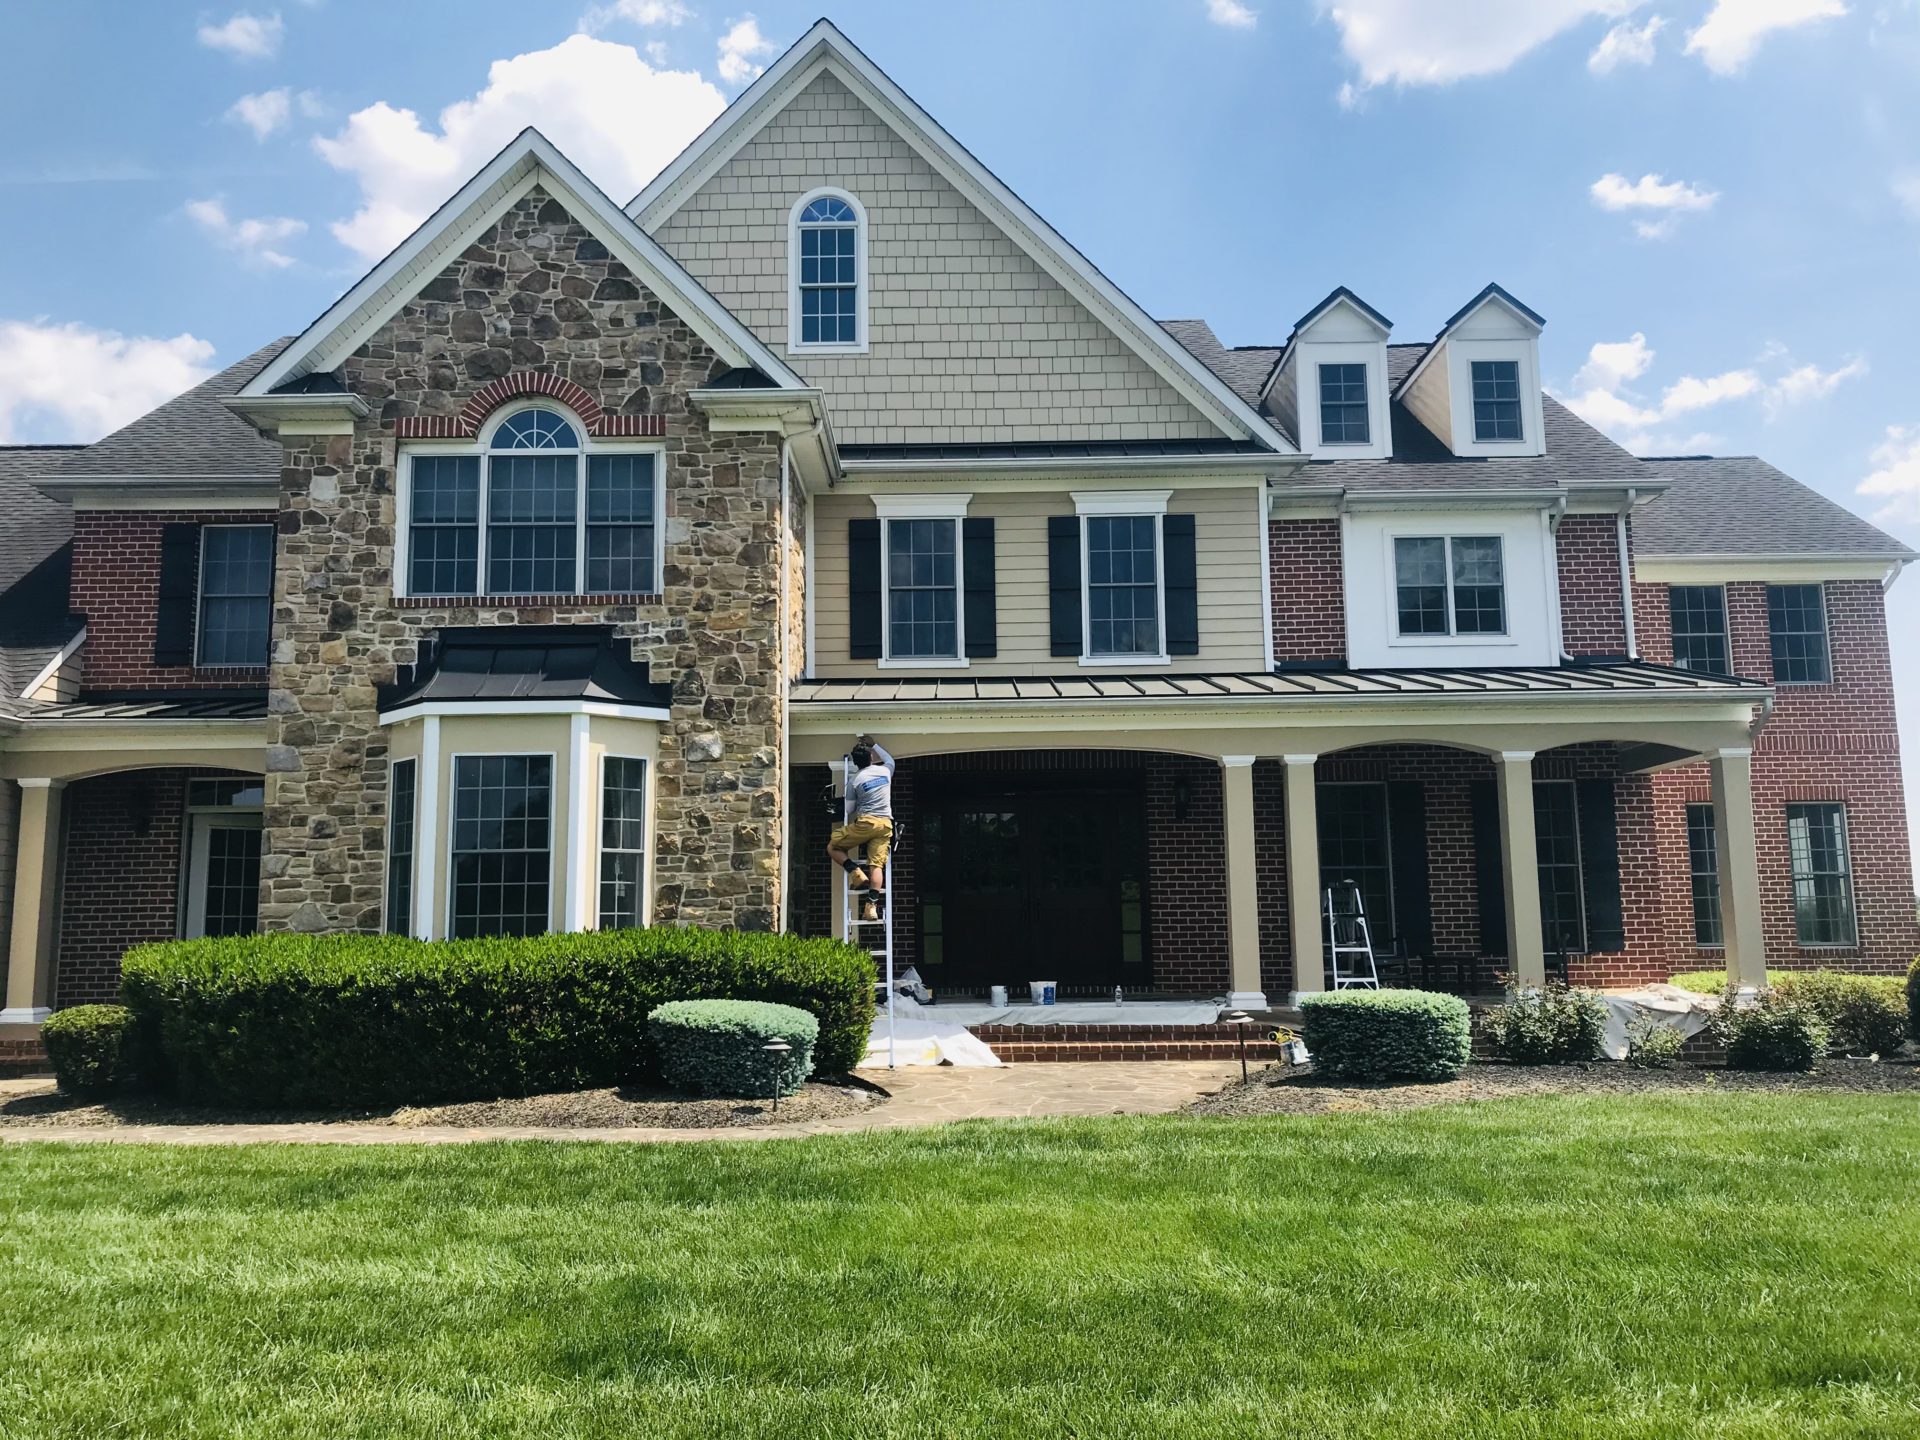 exterior house painting in finksburg maryland using sherwin williams exterior paint